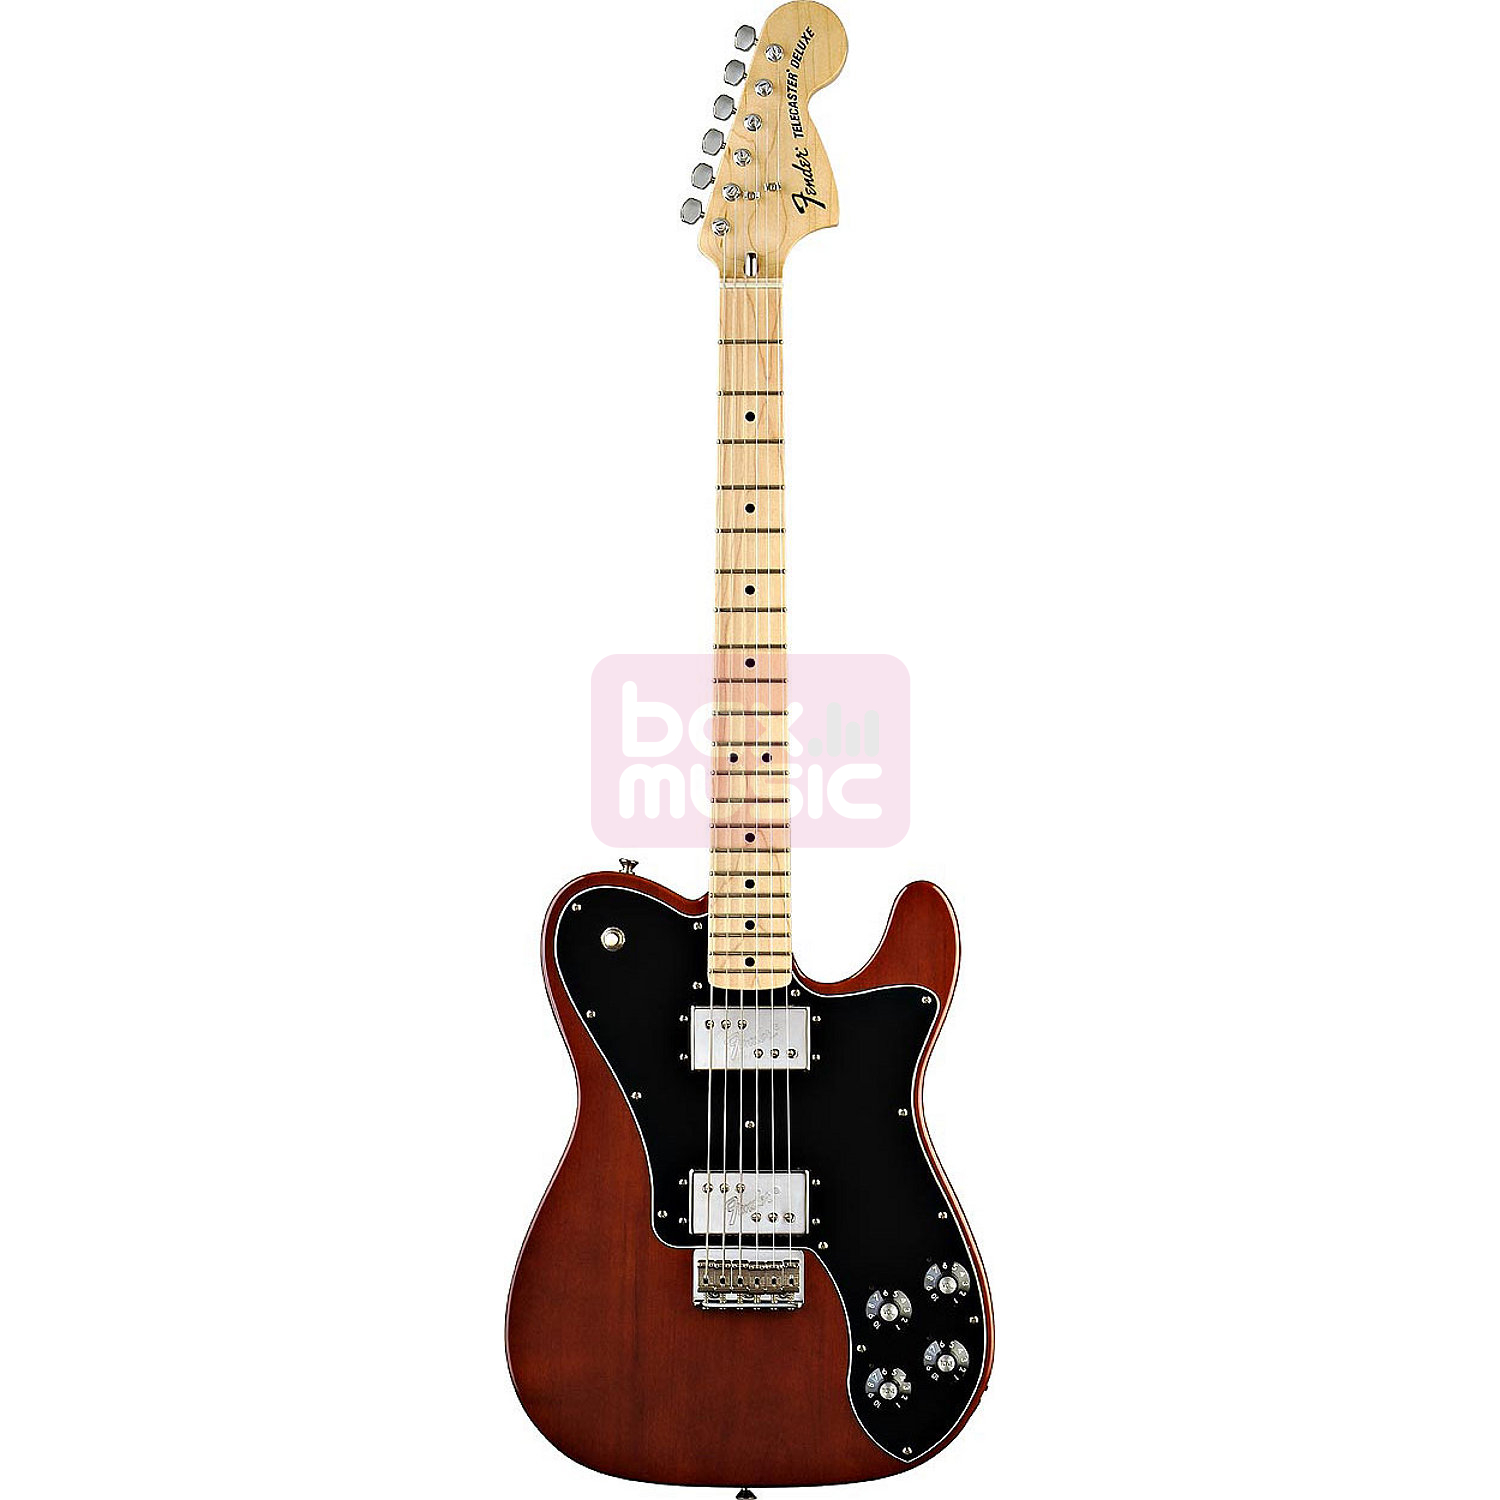 Fender Classic Series 72 Telecaster Deluxe Walnut MN